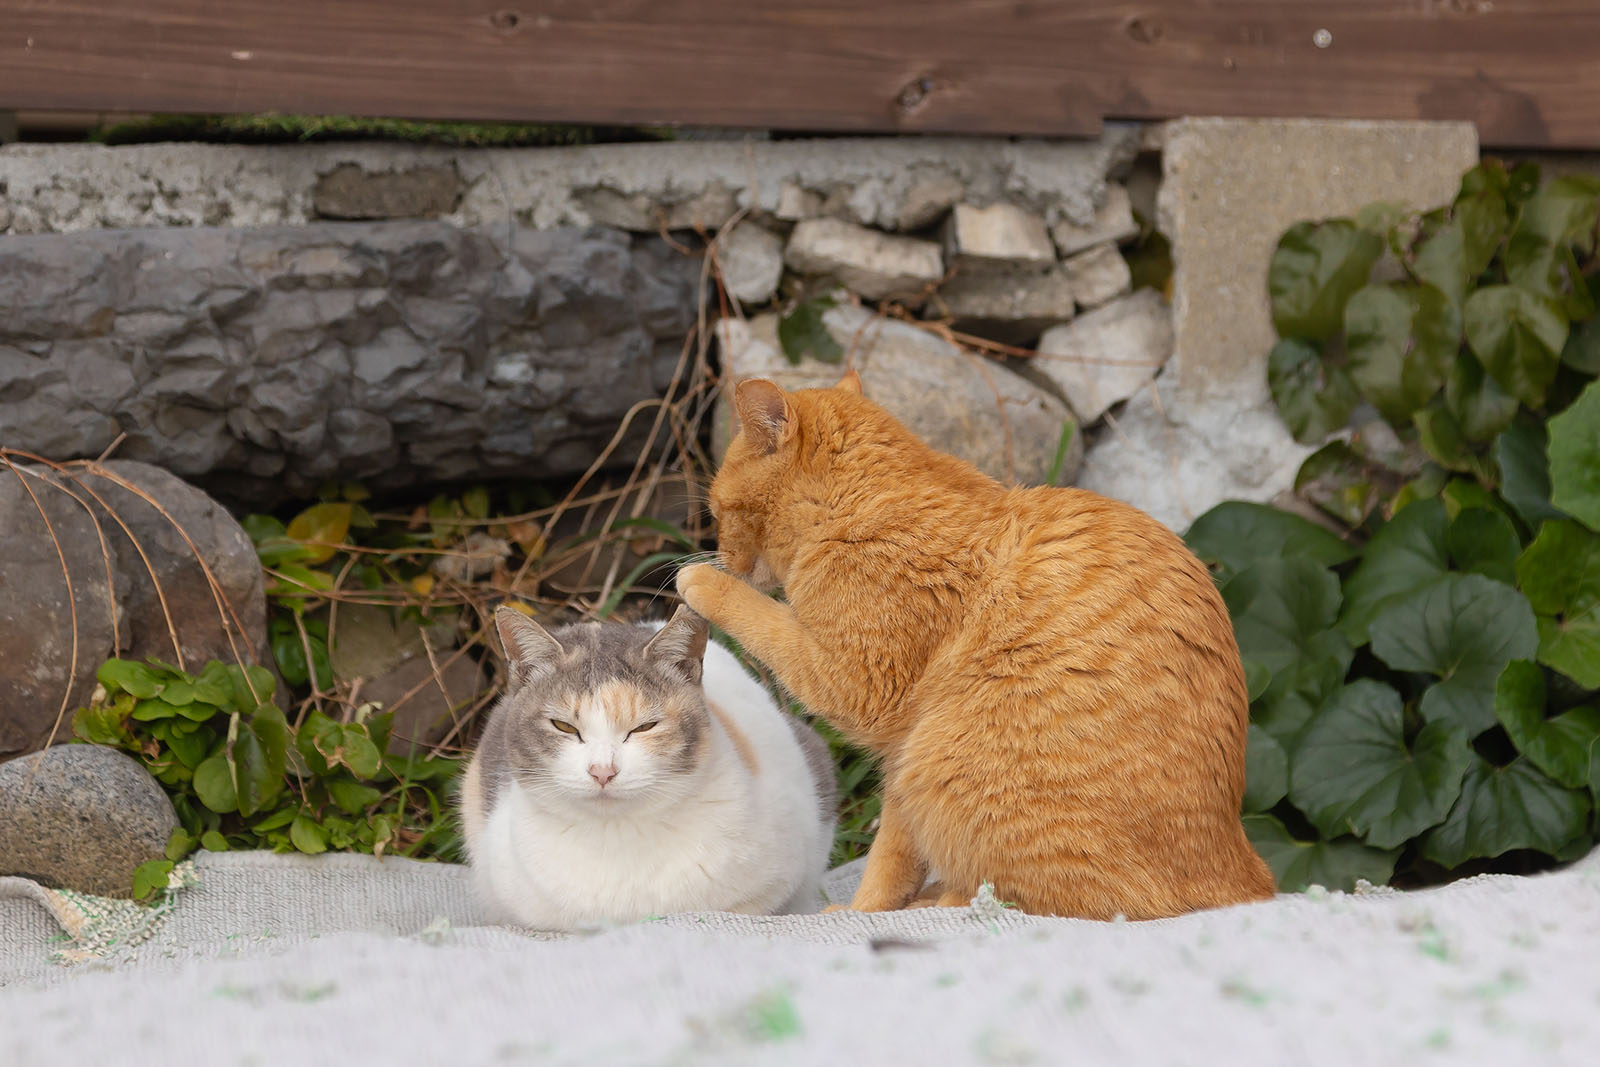 A tabby cat with ginger fur gently pats a white and gray cat on the head. They are sitting on a soft surface outdoors with a stone wall and green foliage in the background. The white and gray cat has its eyes partly closed, appearing relaxed.